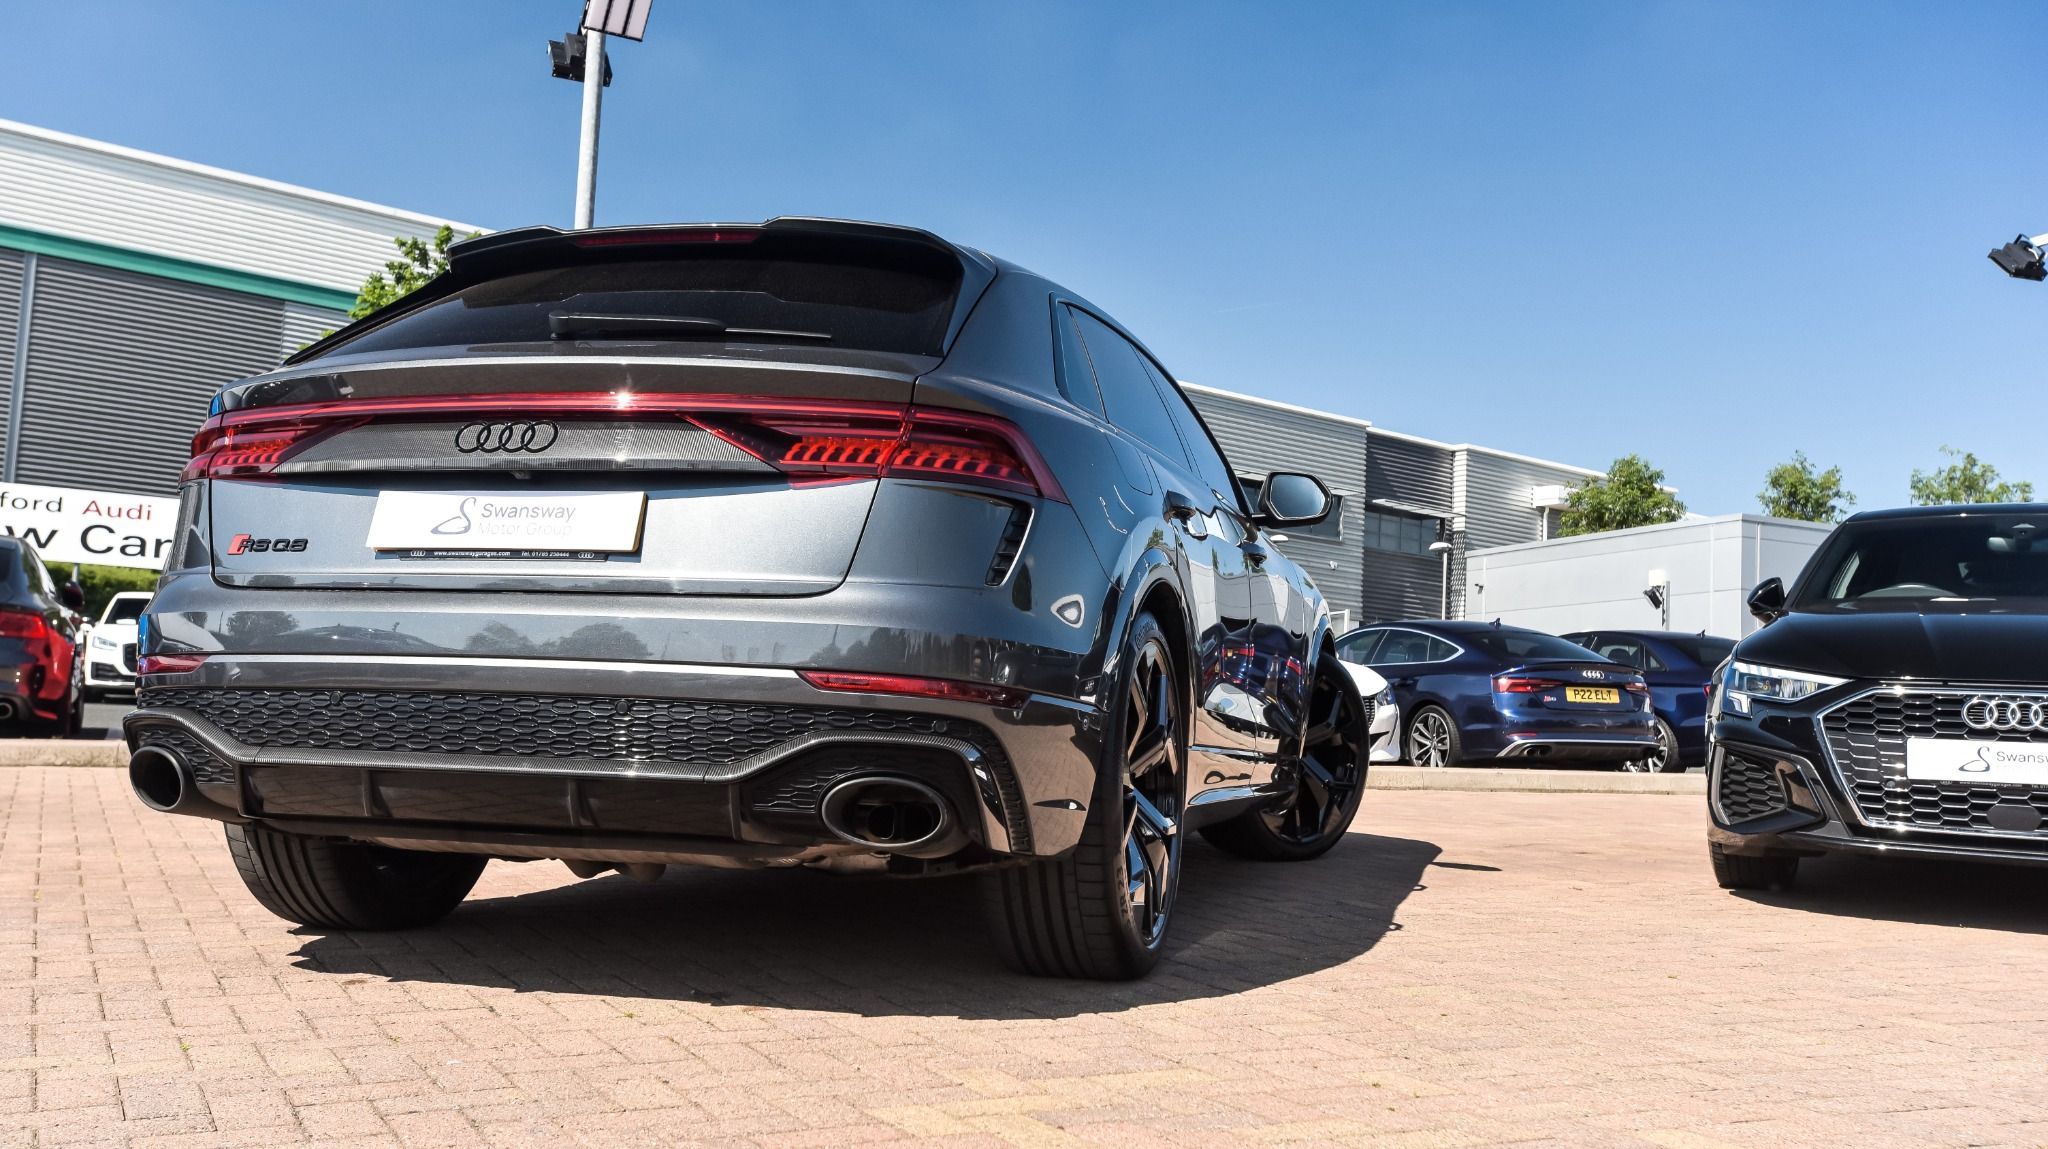 Rear View of grey Audi on the forecourt